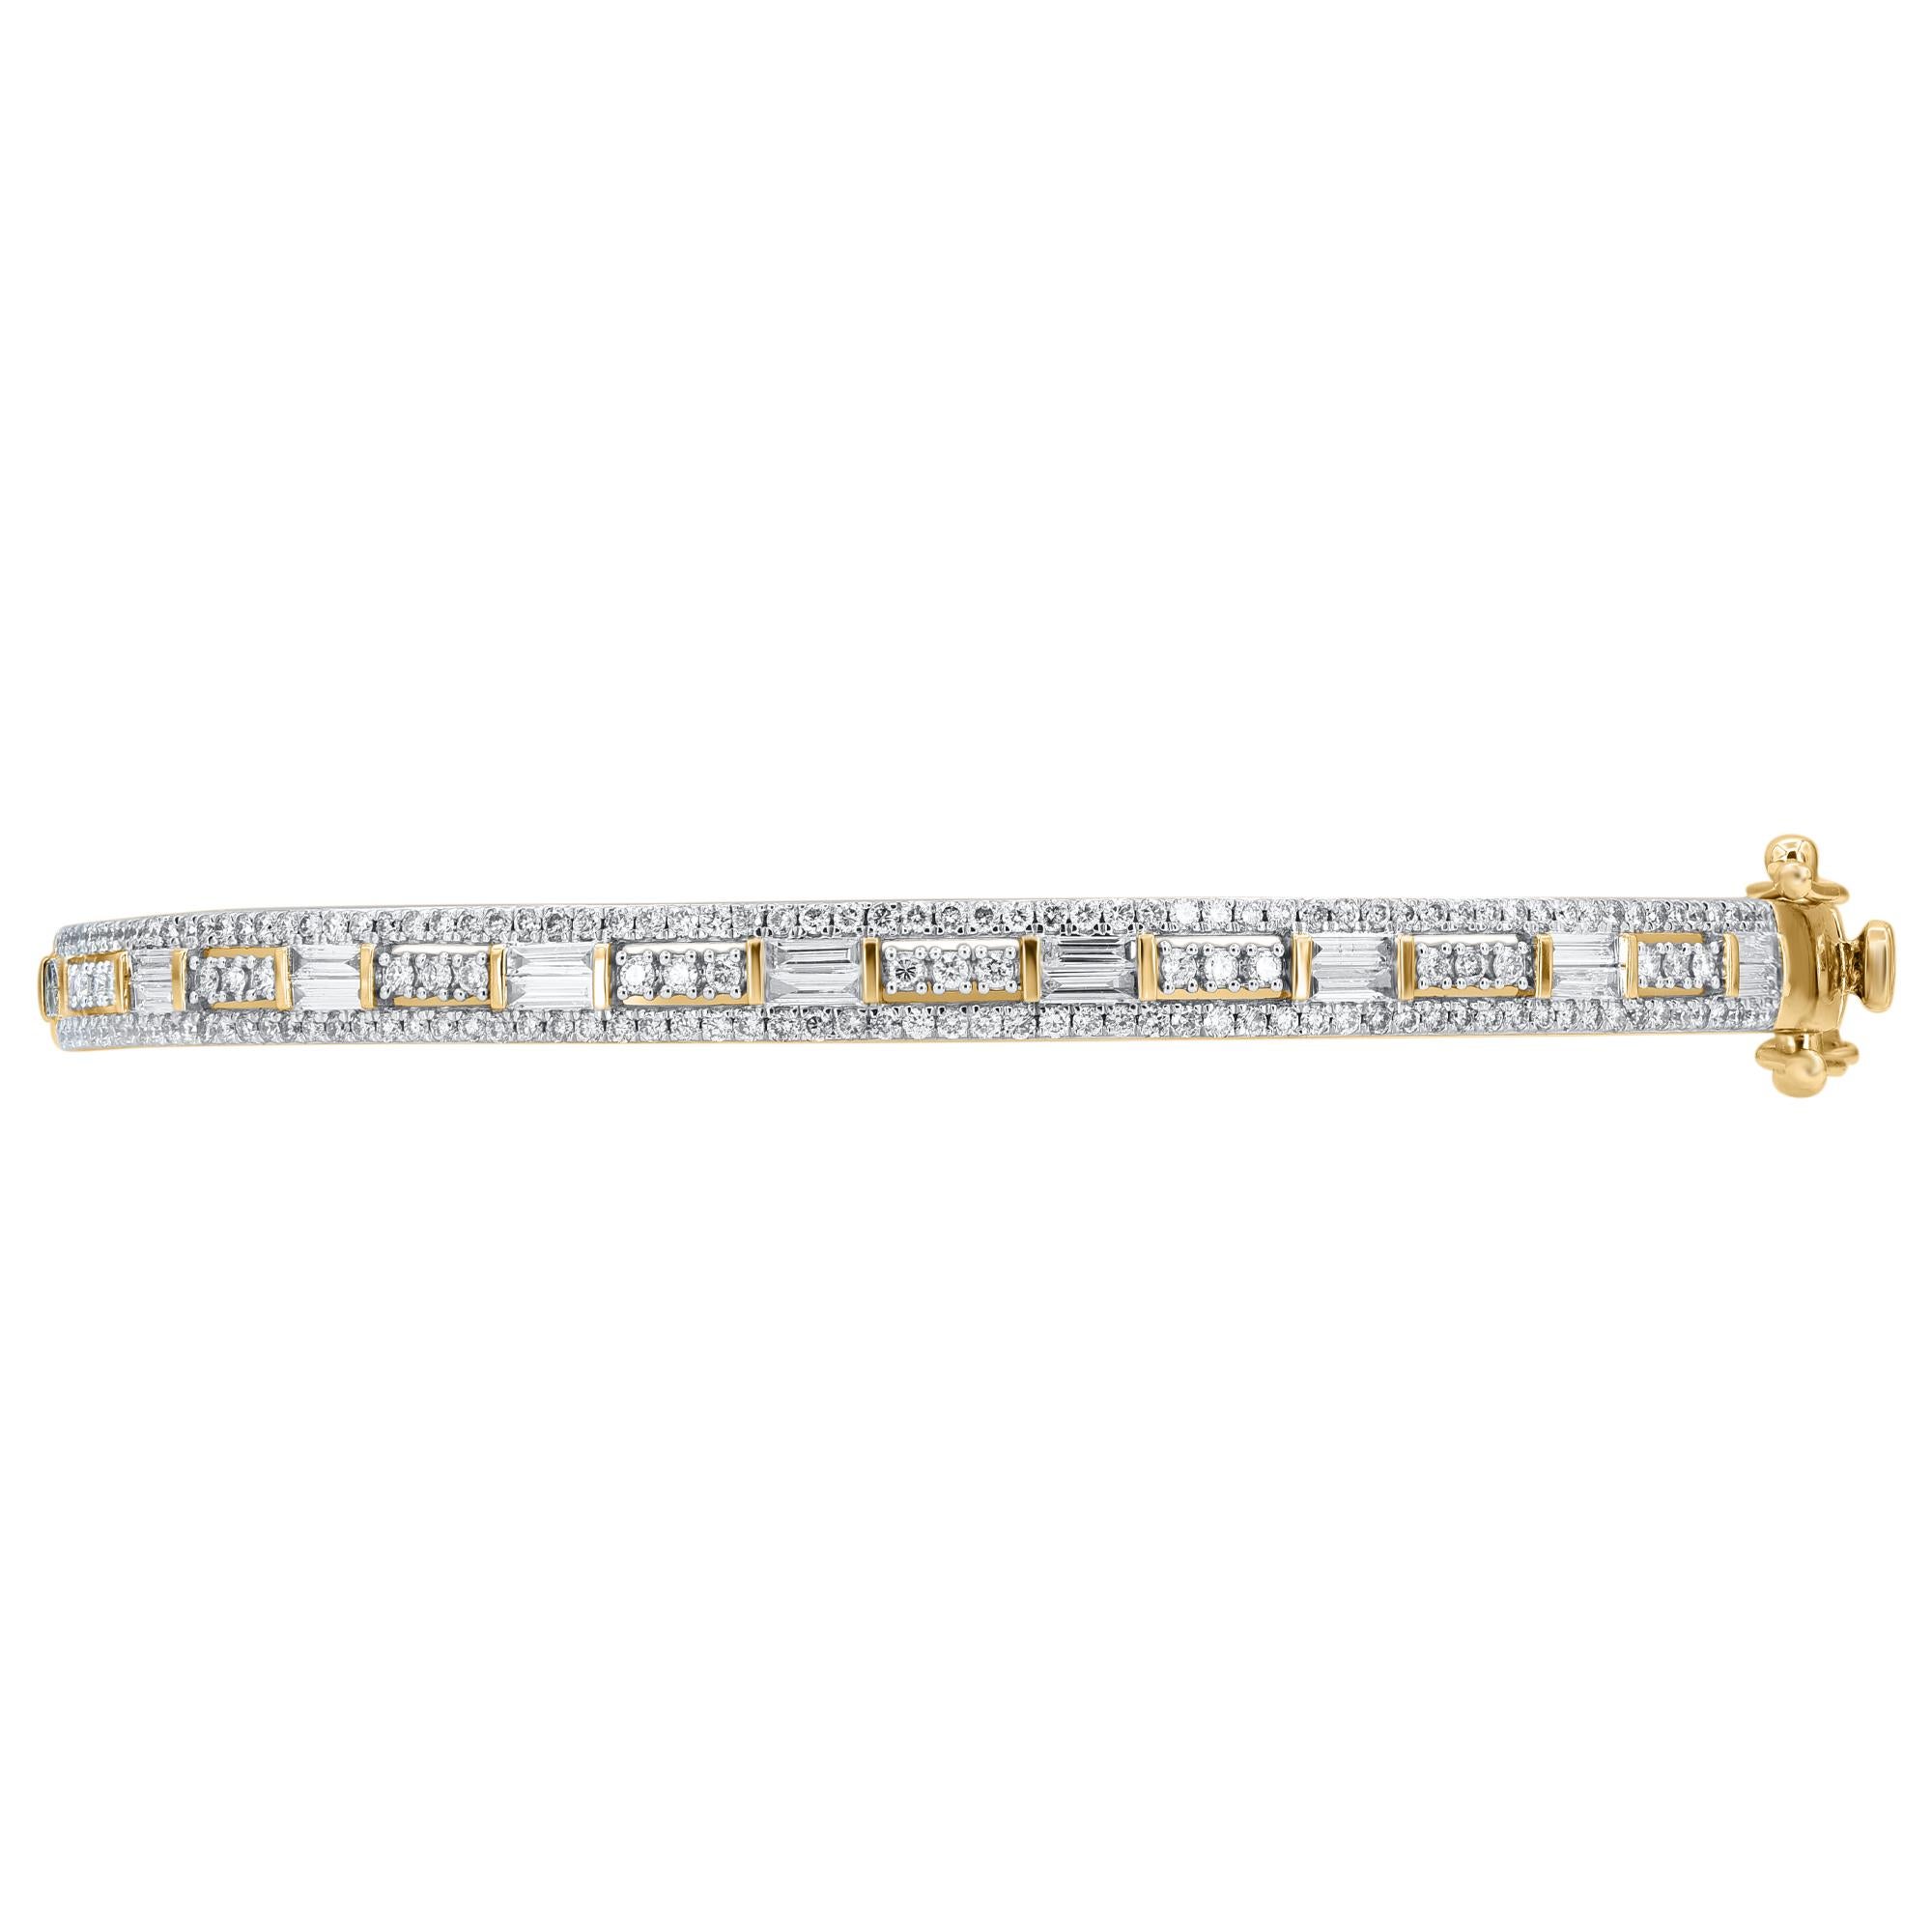 Add a touch of sparkle to any look with this sleek diamond bangle bracelet. This Shimmering bangle features 180 natural Brilliant Cut, Single Cut & Baguette diamonds set in prong and Channel setting and crafted in 14kt yellow gold. Diamonds are